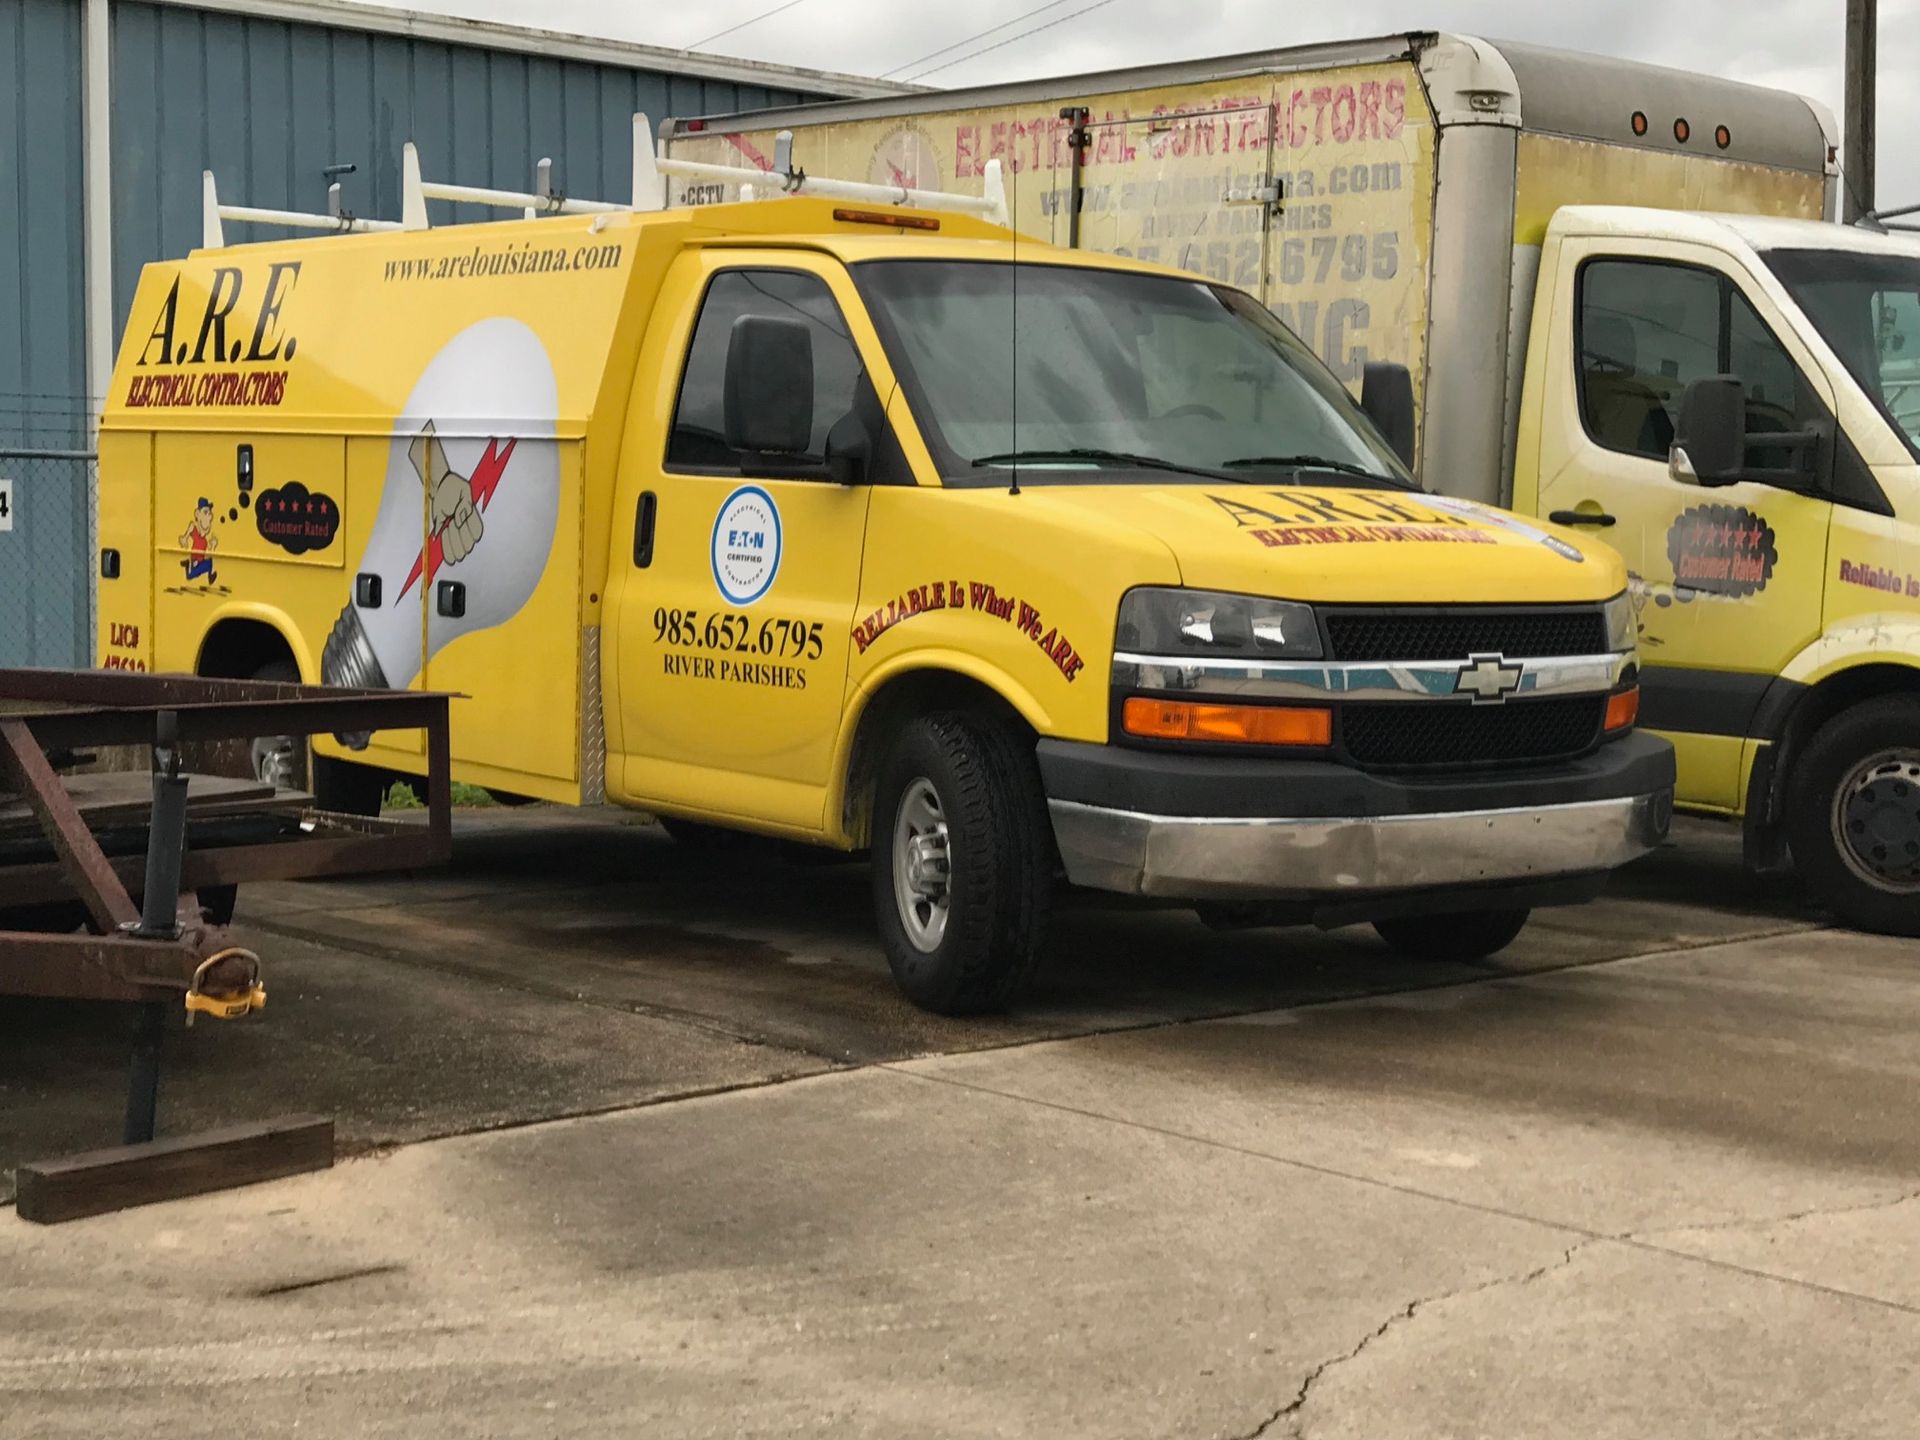 A Yellow A.R.E. Truck Is Parked Next to A Truck